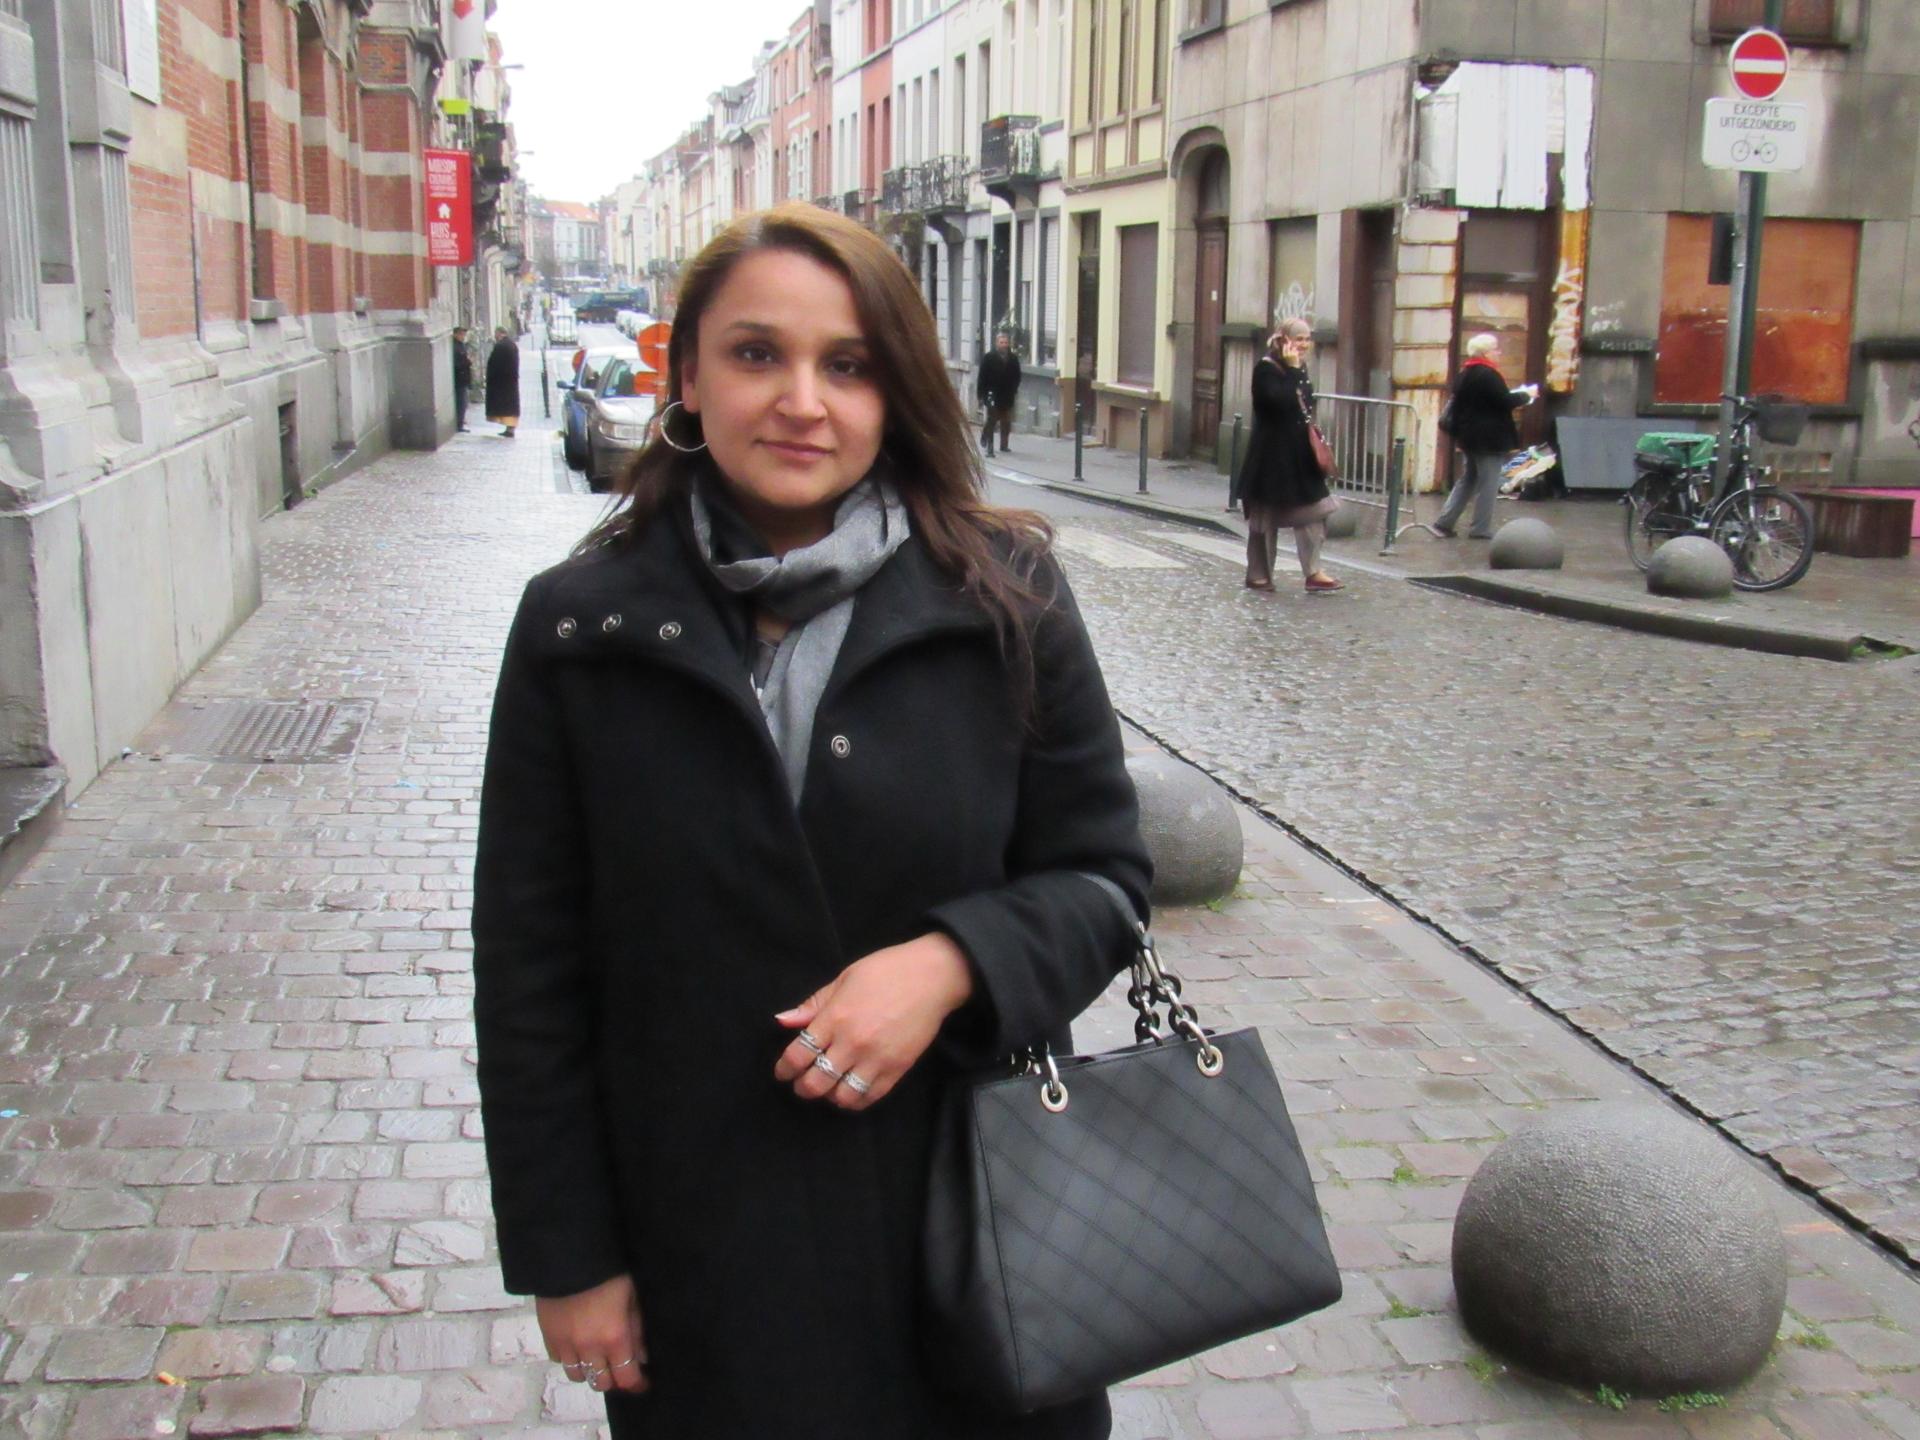 Shazia Manzoor has lived in Molenbeek for most of her life.